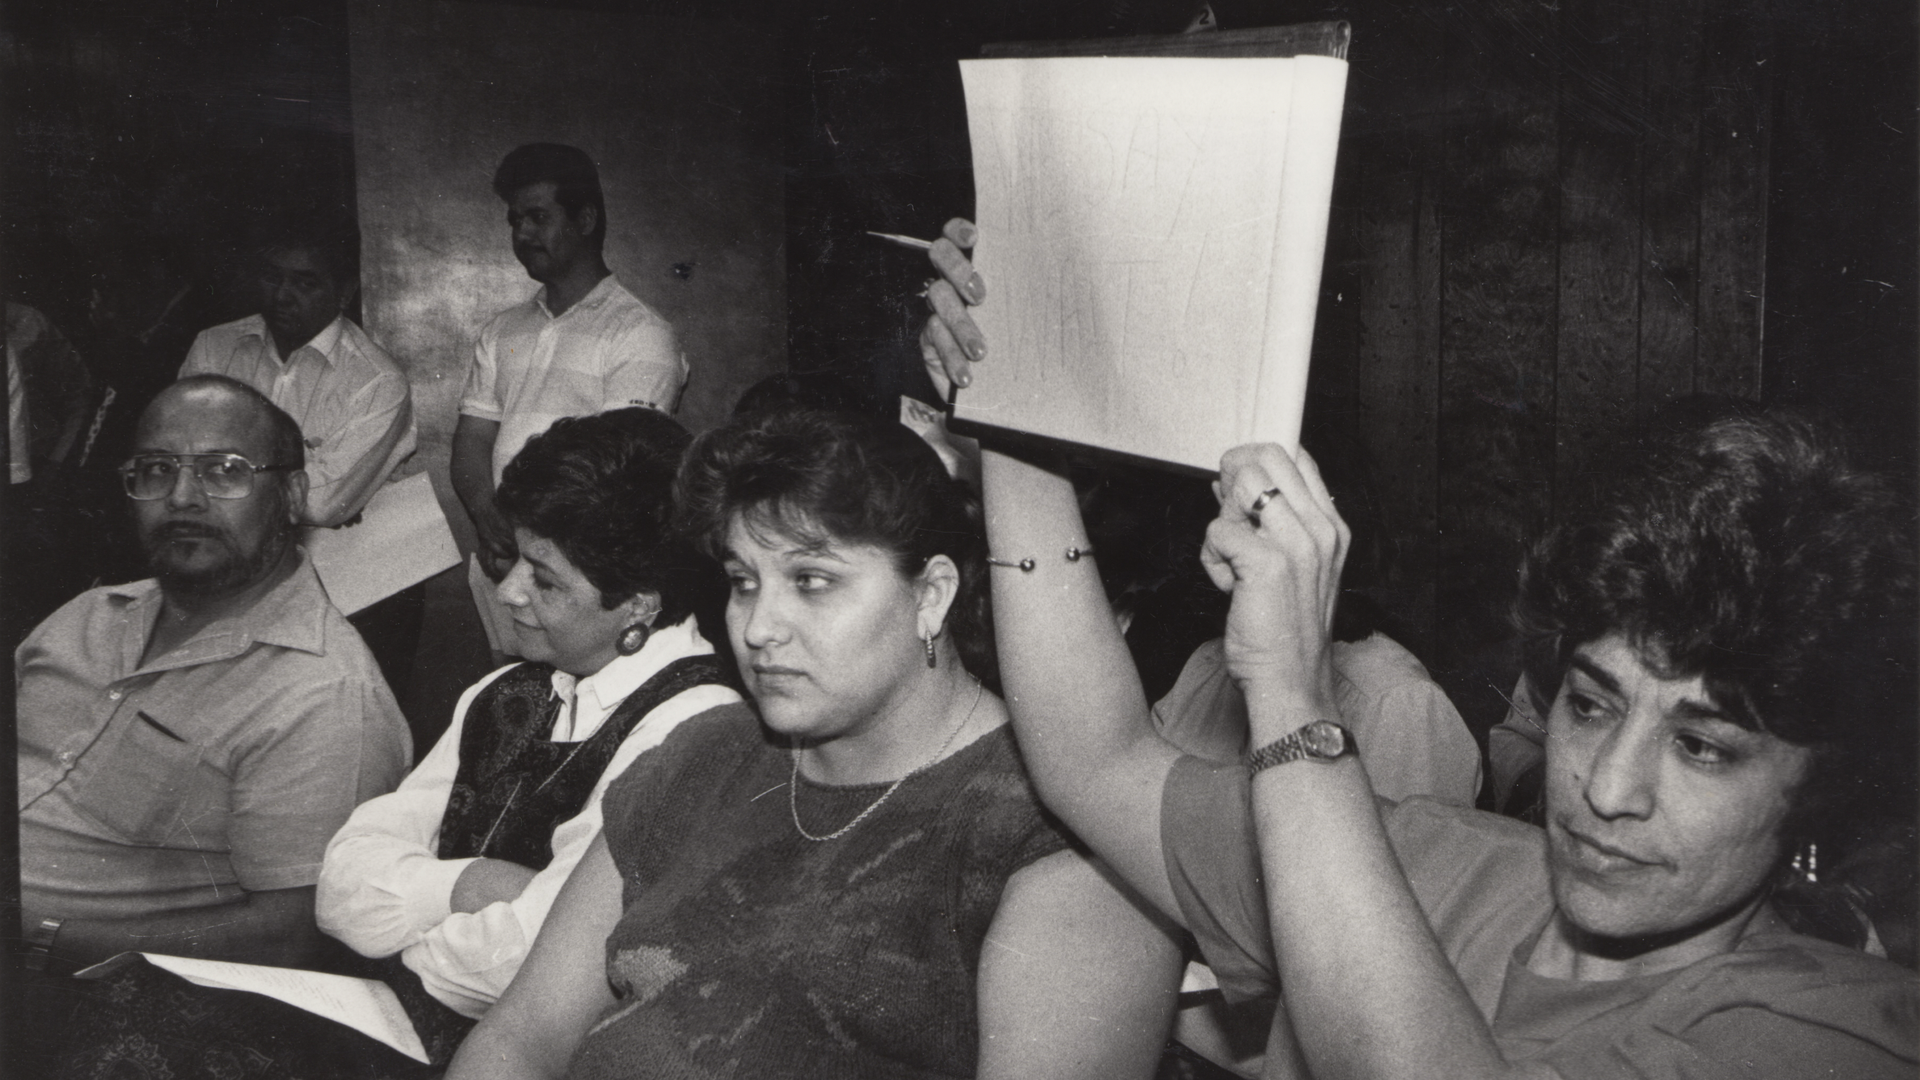 A black and white photo shows adults sitting at a meeting and woman holding up a sign, though the sign is not legible